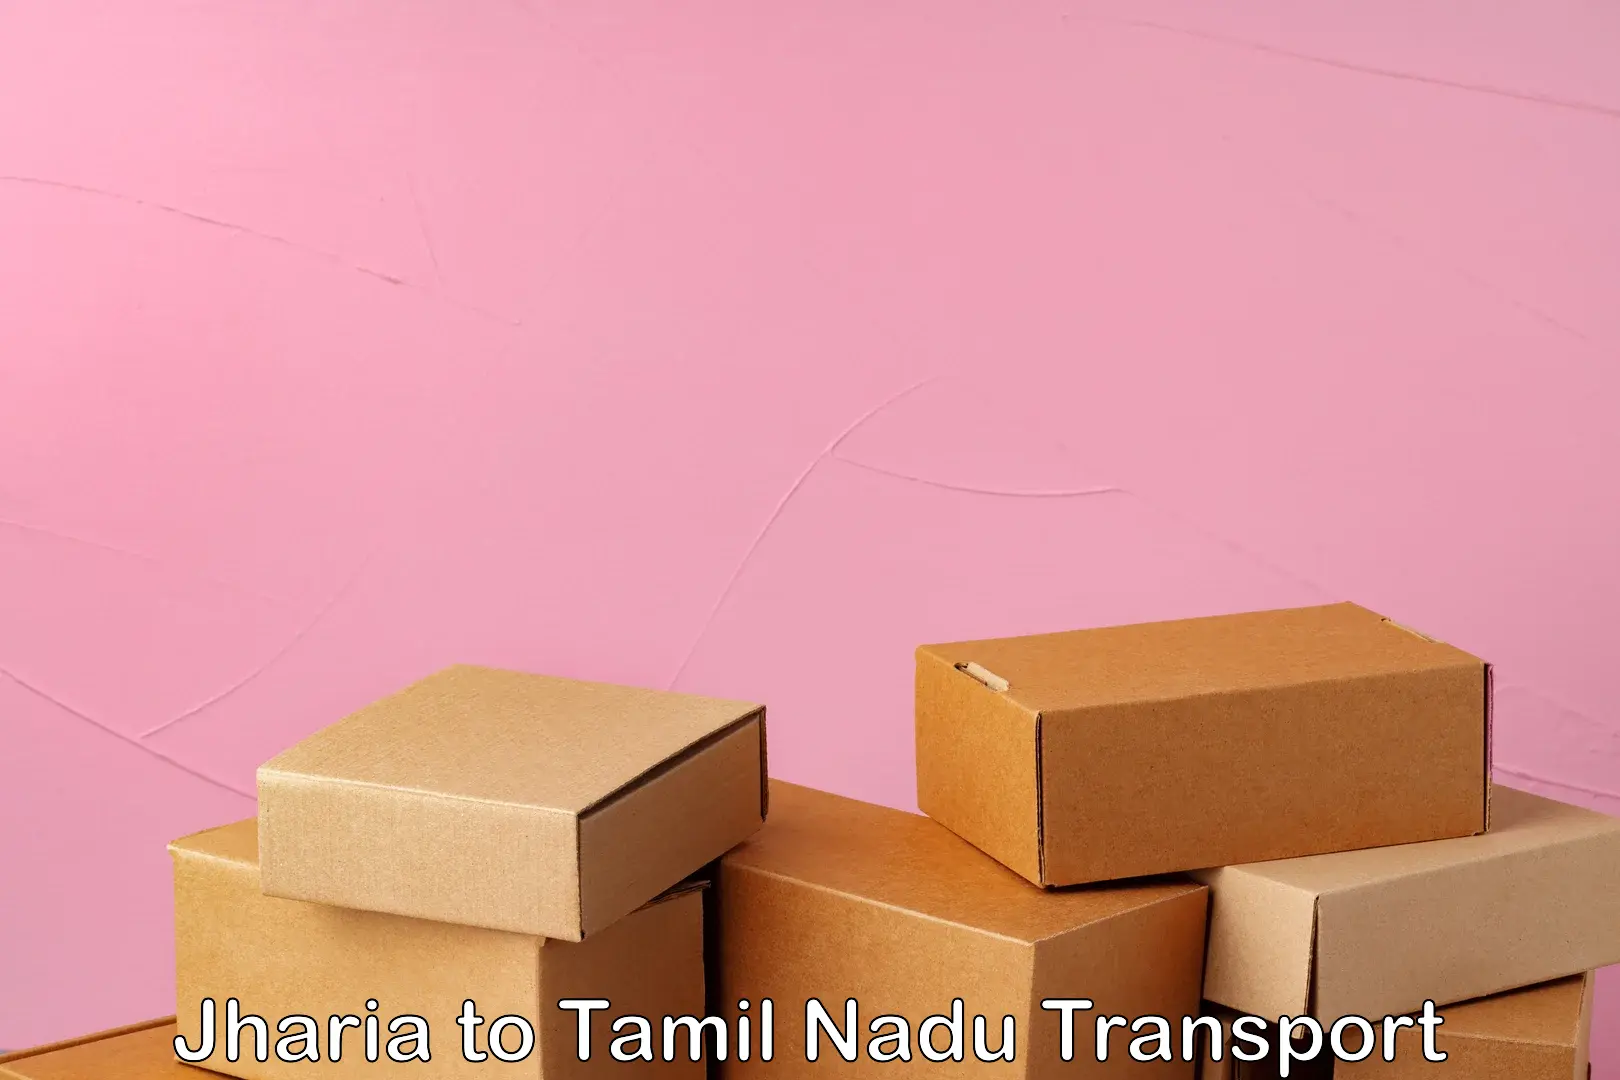 Container transport service Jharia to Tamil Nadu